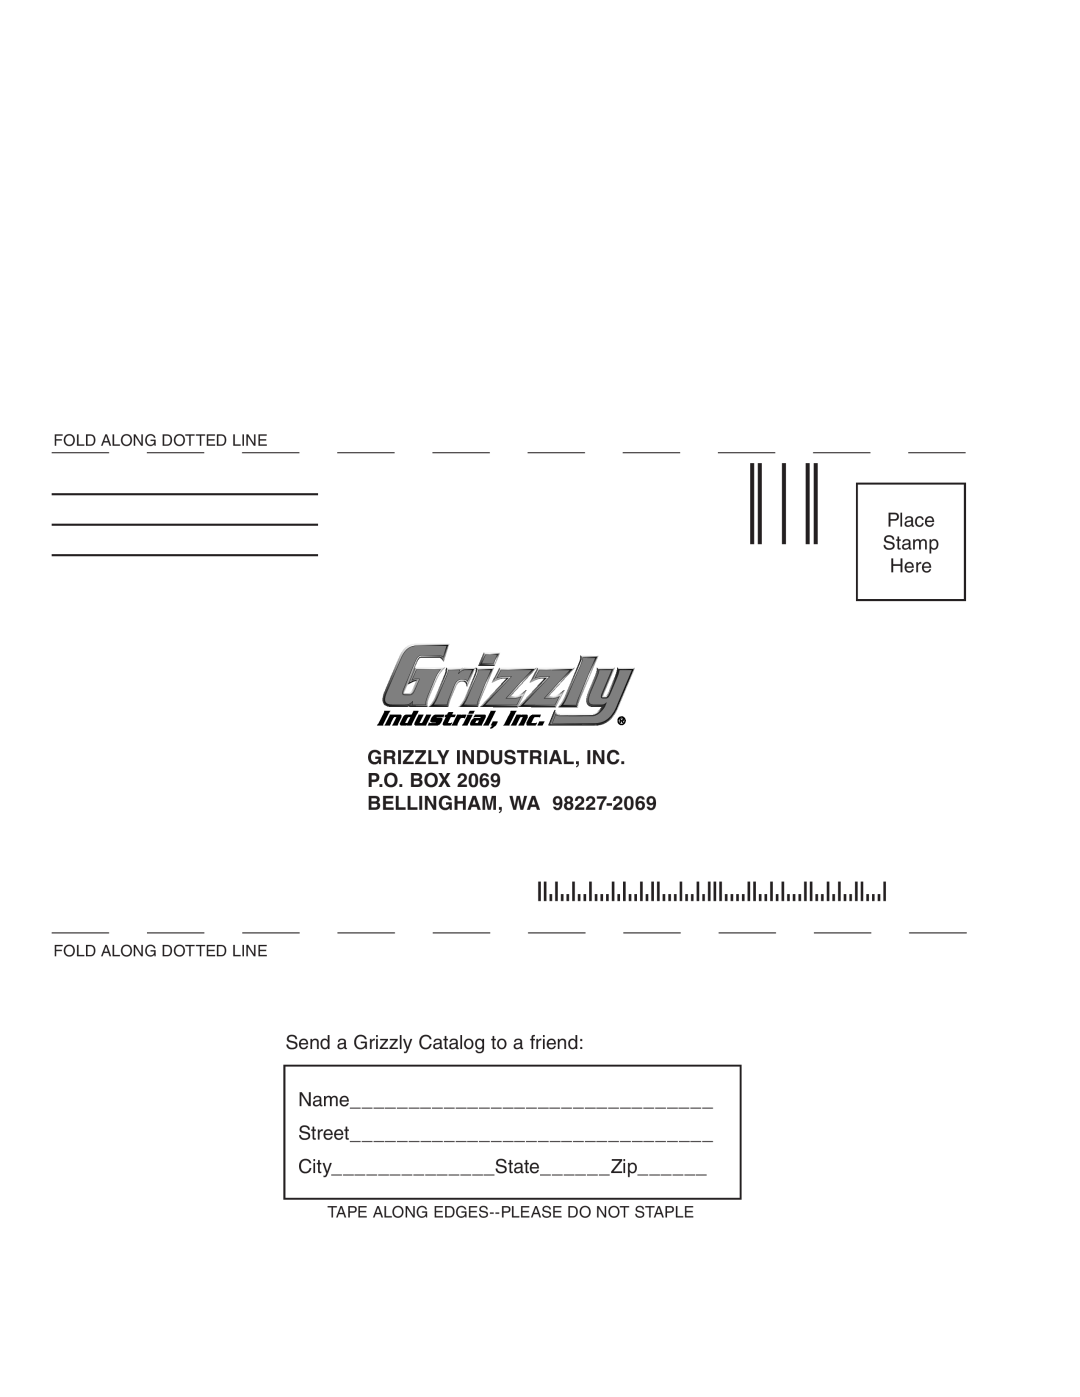 Grizzly G0700 owner manual Place Stamp Here, Grizzly Industrial, Inc P.O. Box Bellingham, Wa 